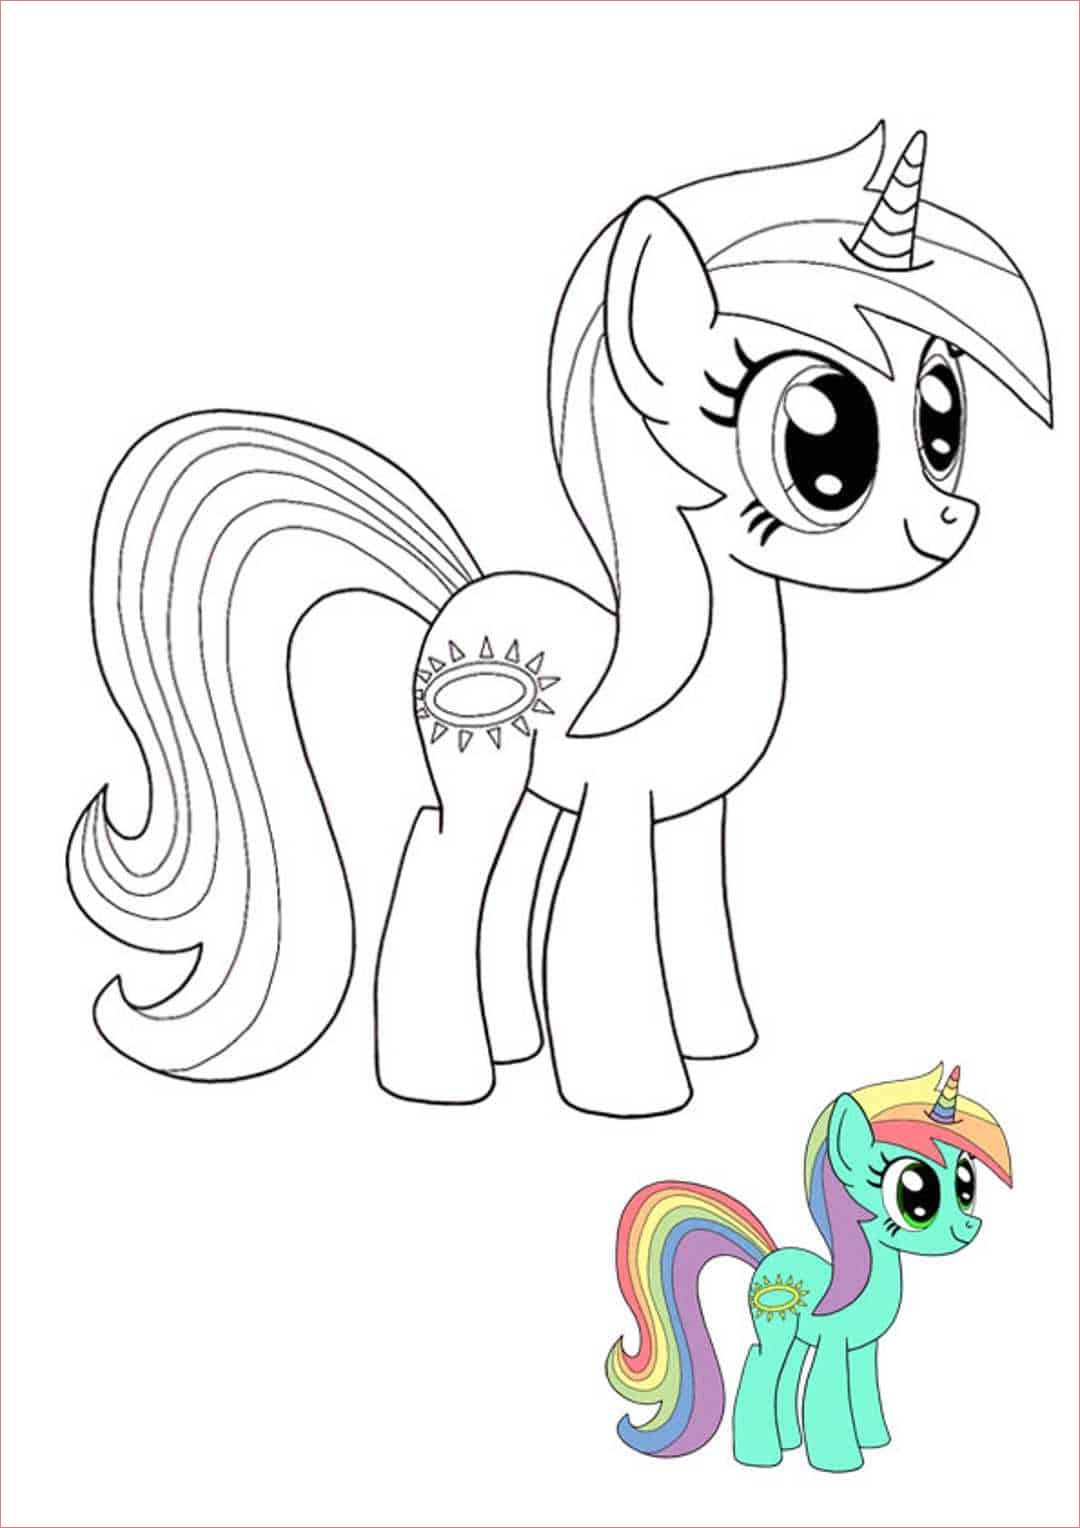 telecharger coloriage my little pony dessin